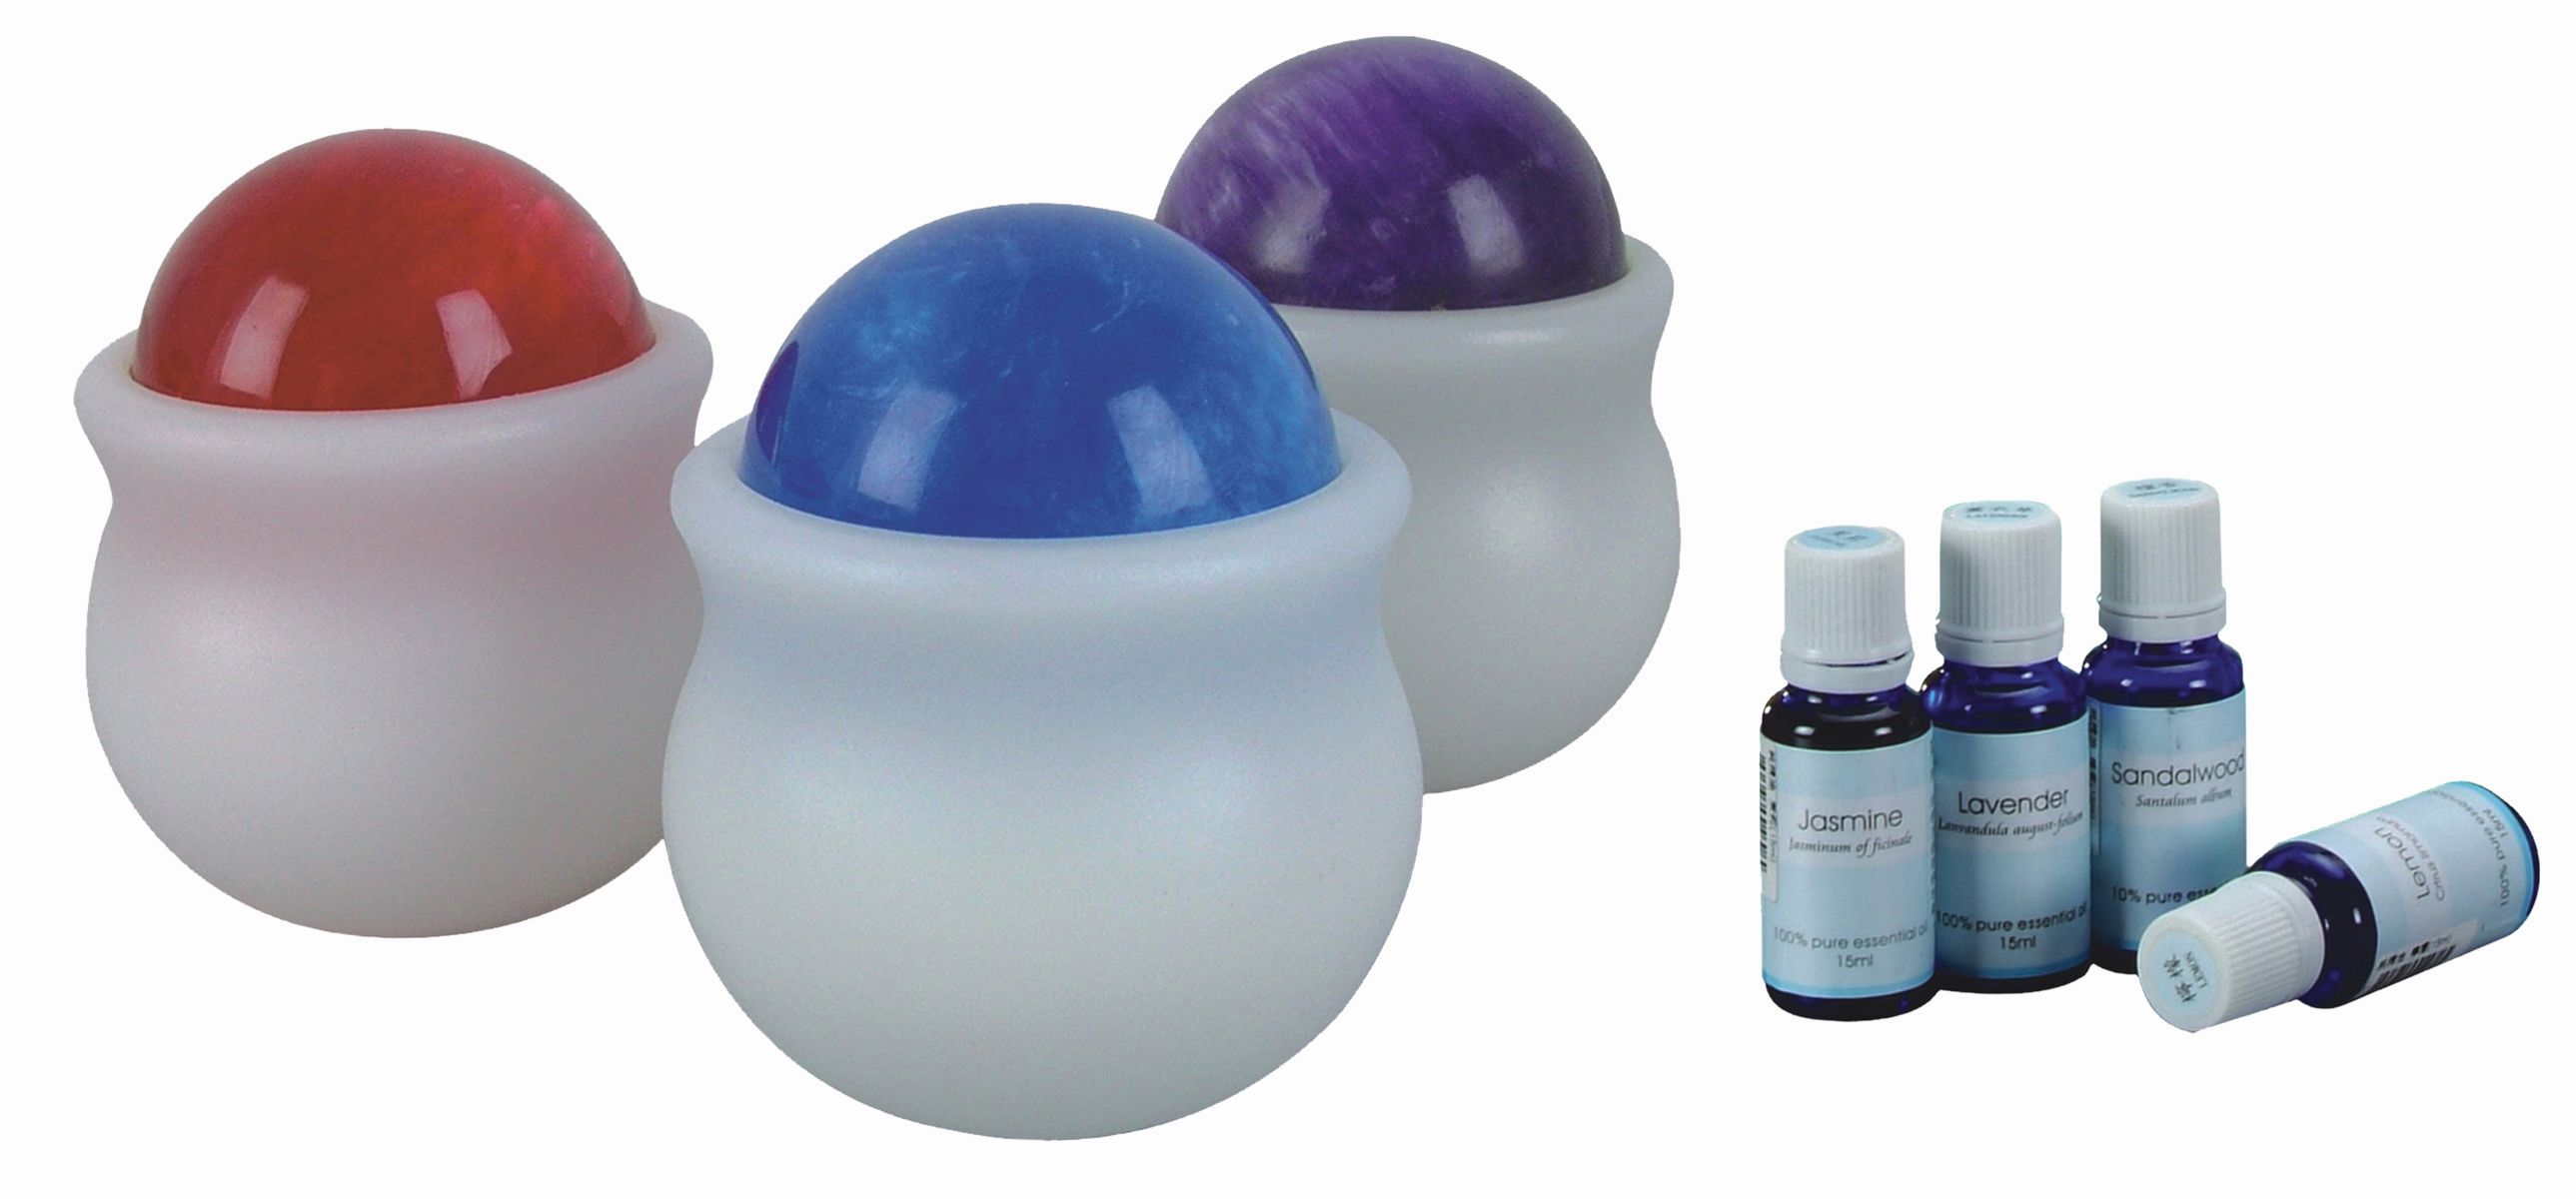 Point-Relief Hand-held massage roller, large revolving ball